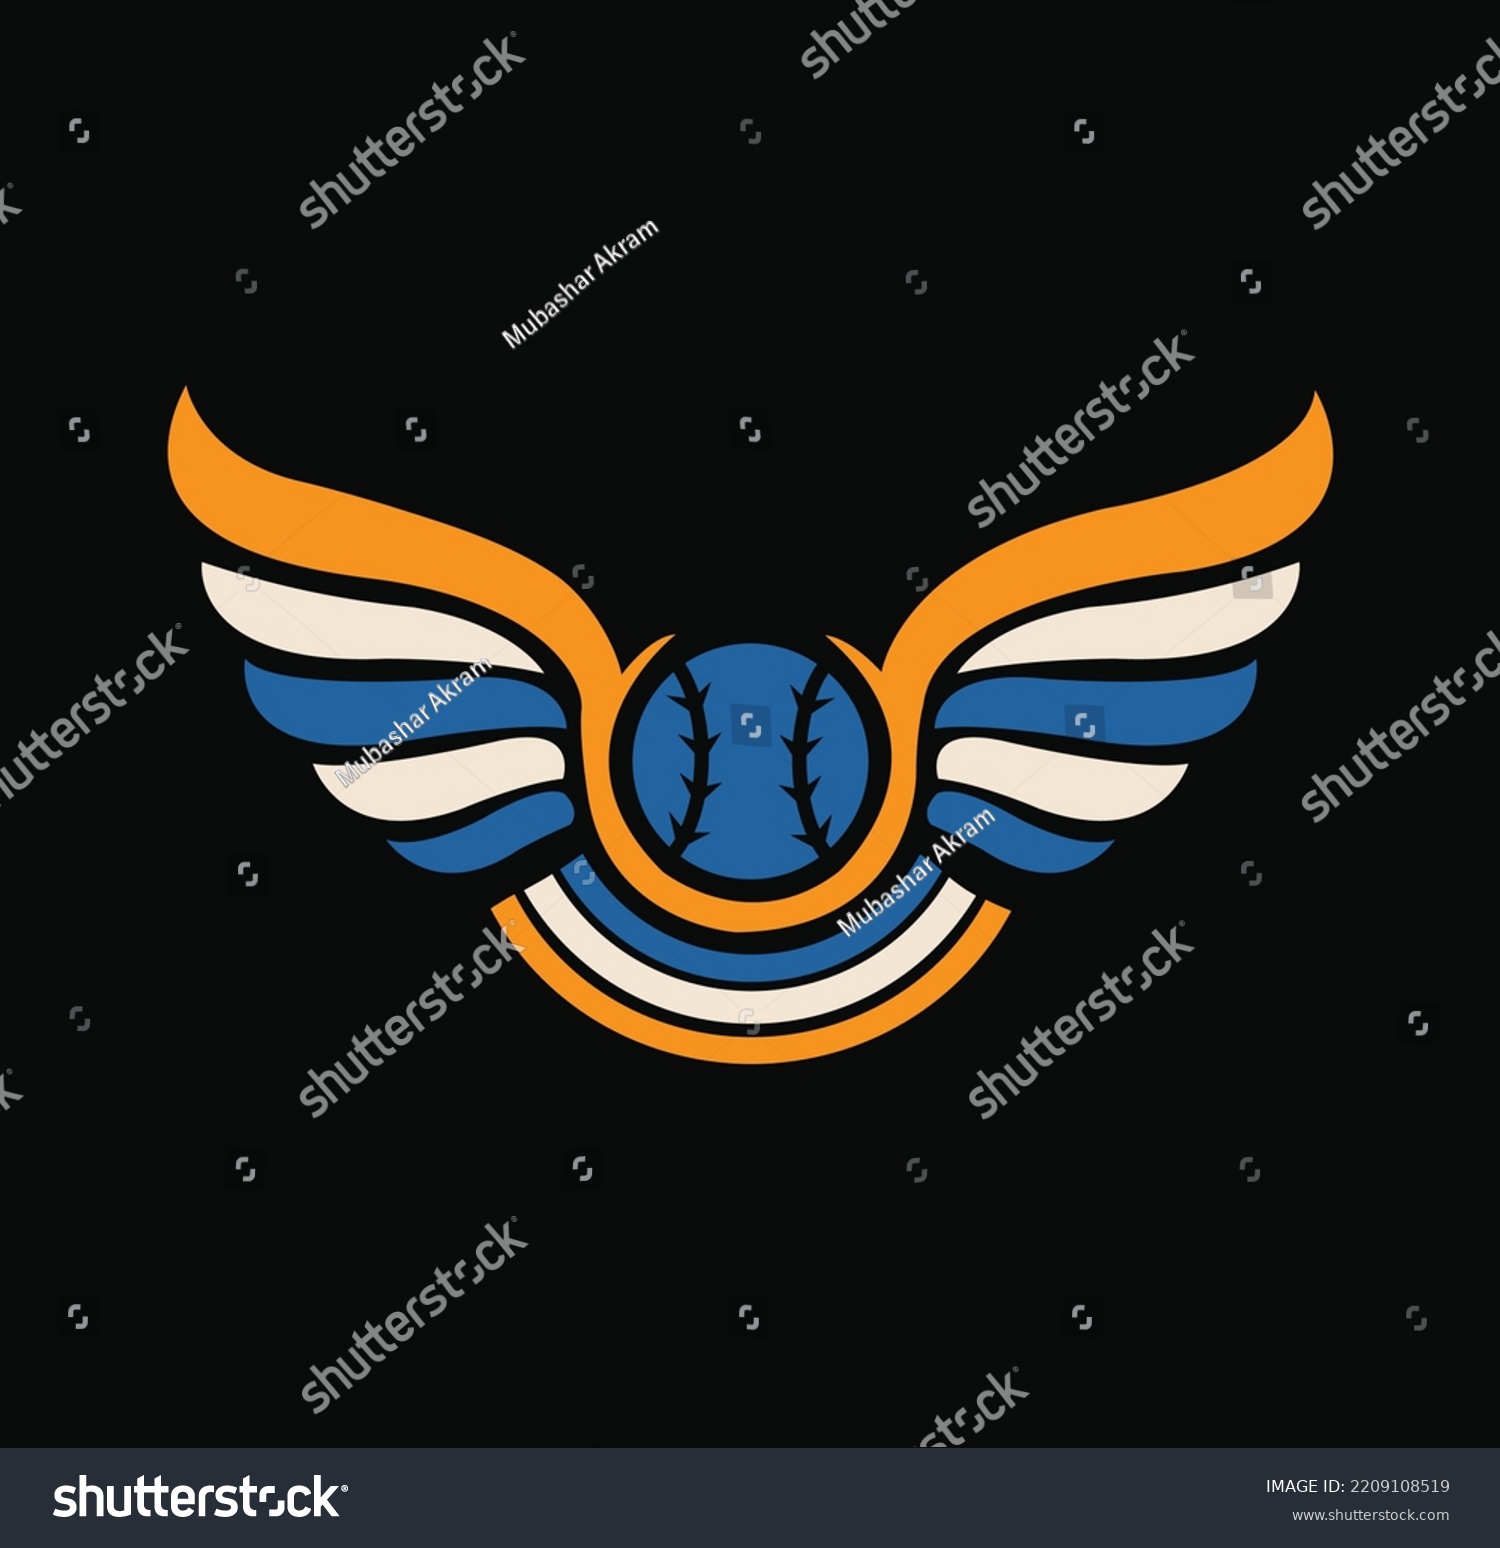 SVG of Baseball Ball Flying With Angel Wings silhouette vector with black background. svg